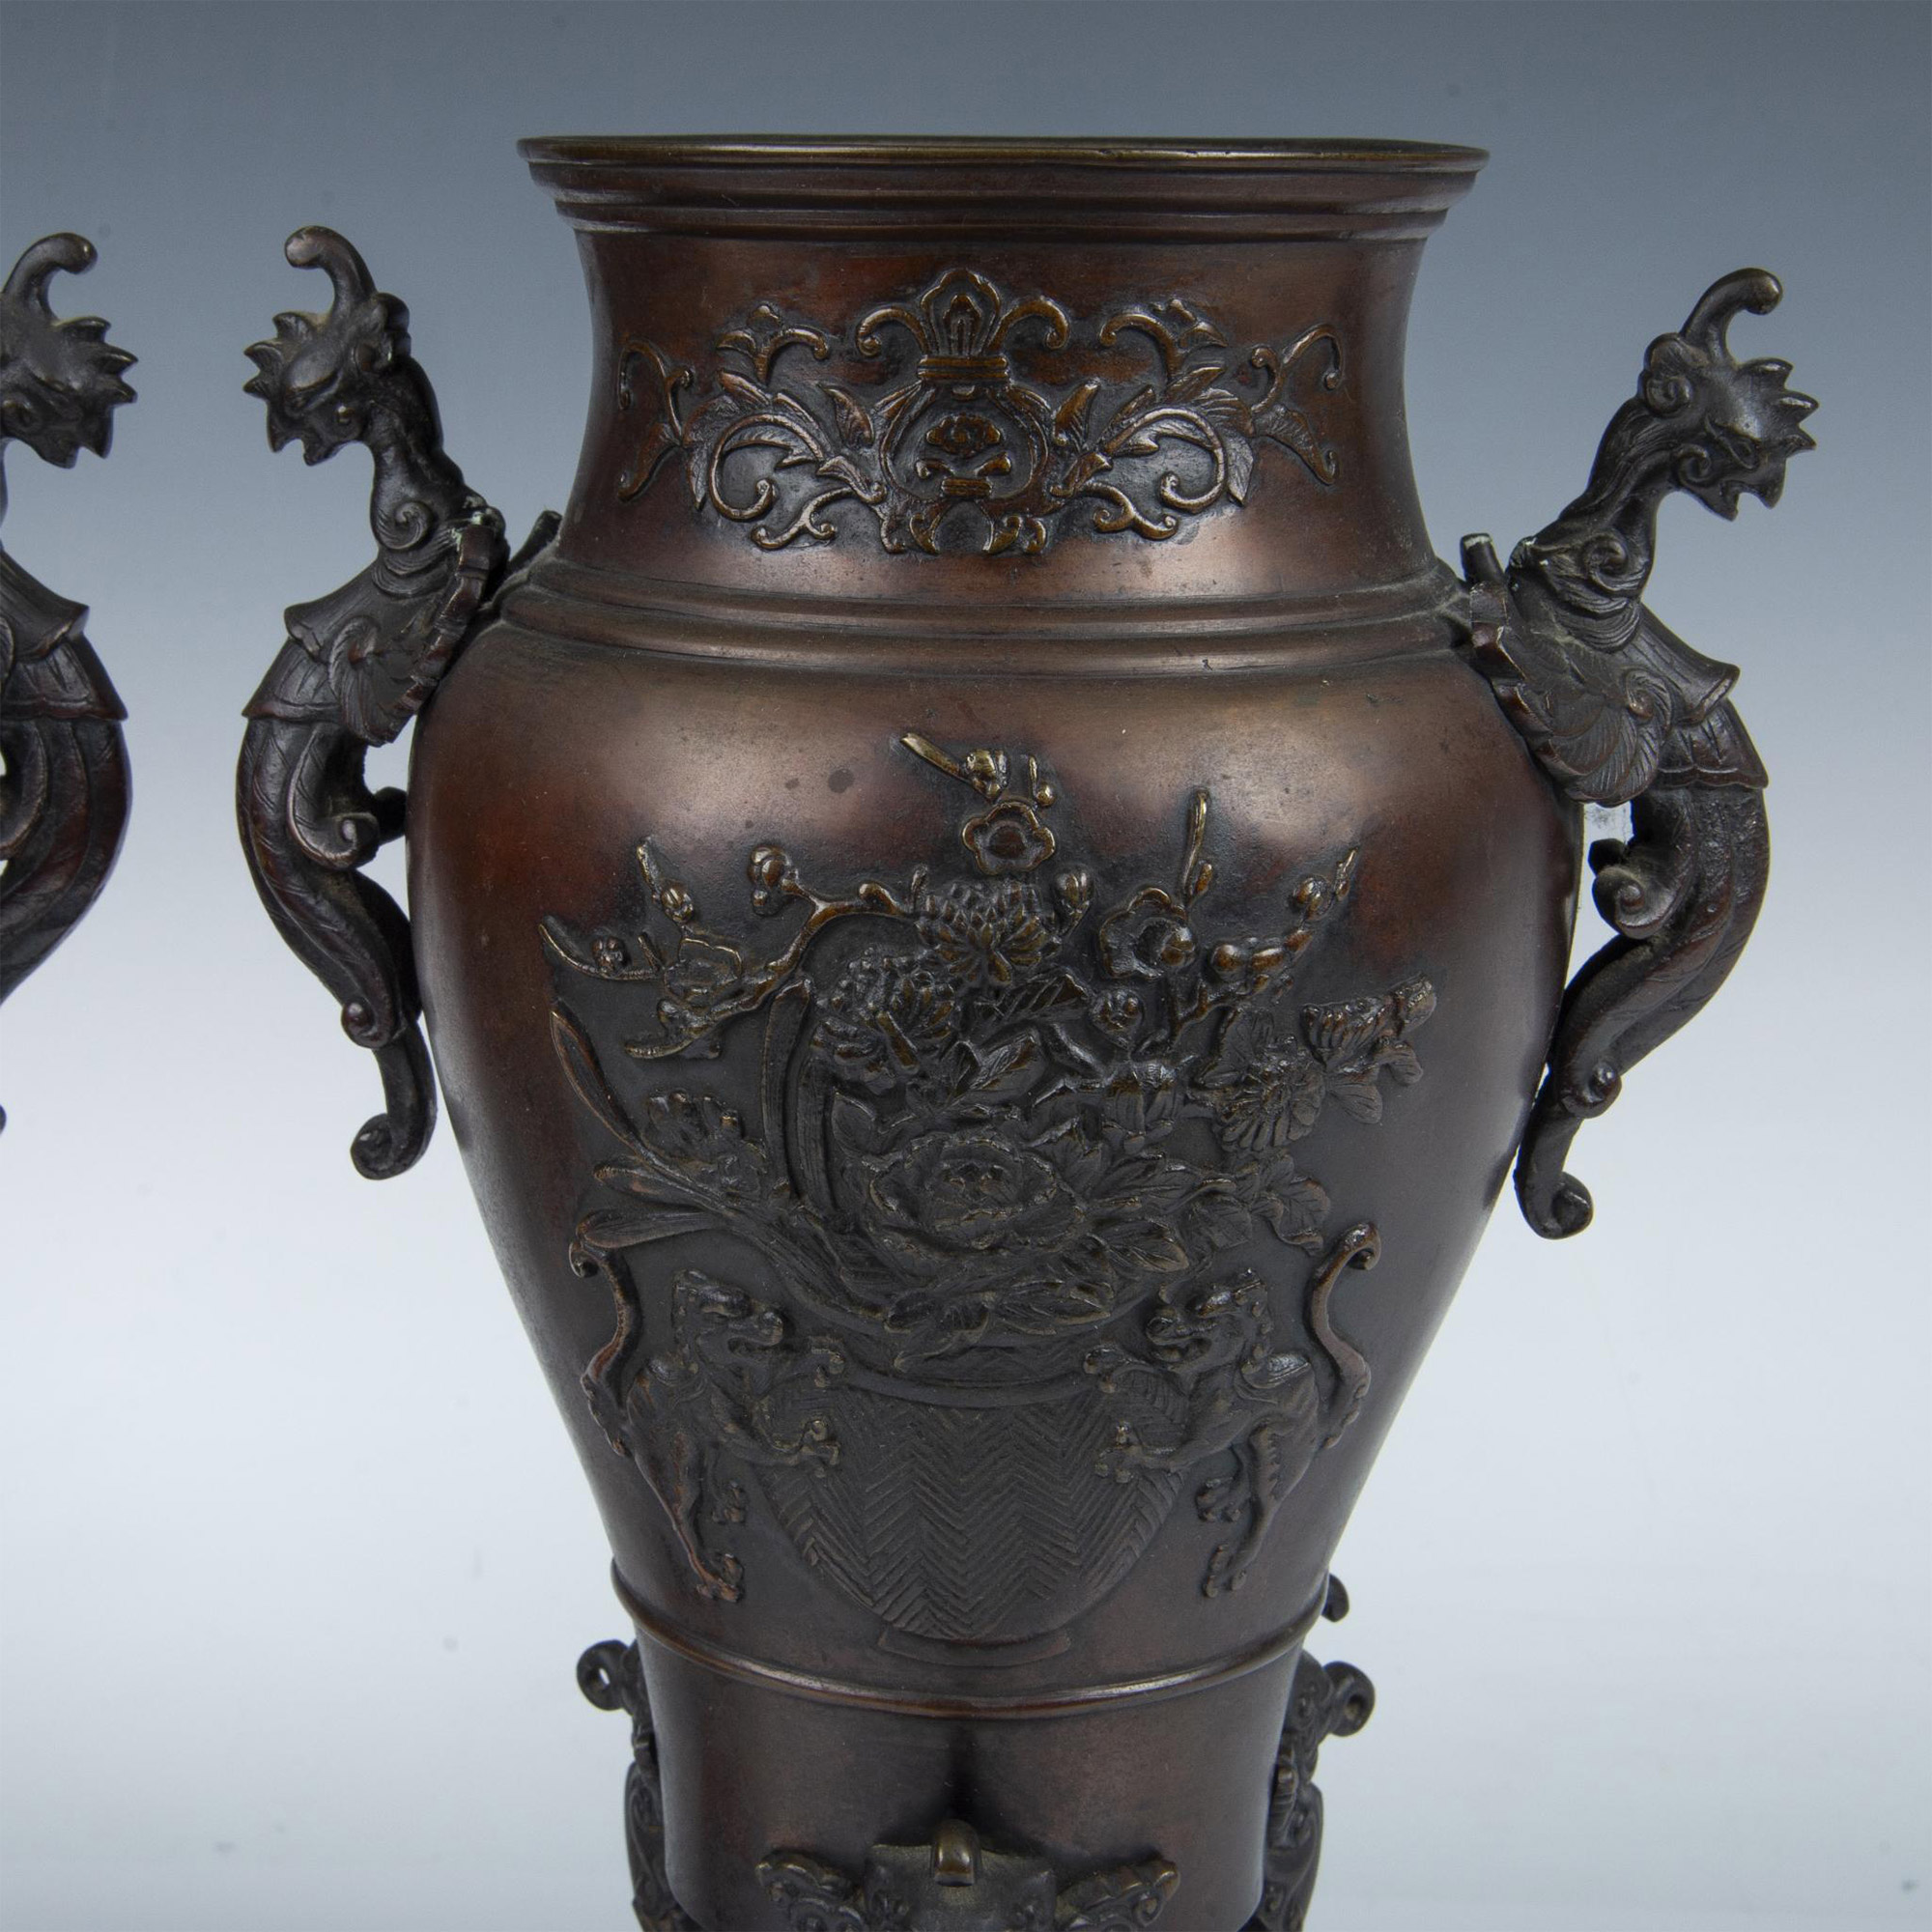 Pair of Antique Japanese Bronze Urns with Griffins Designs - Image 3 of 7